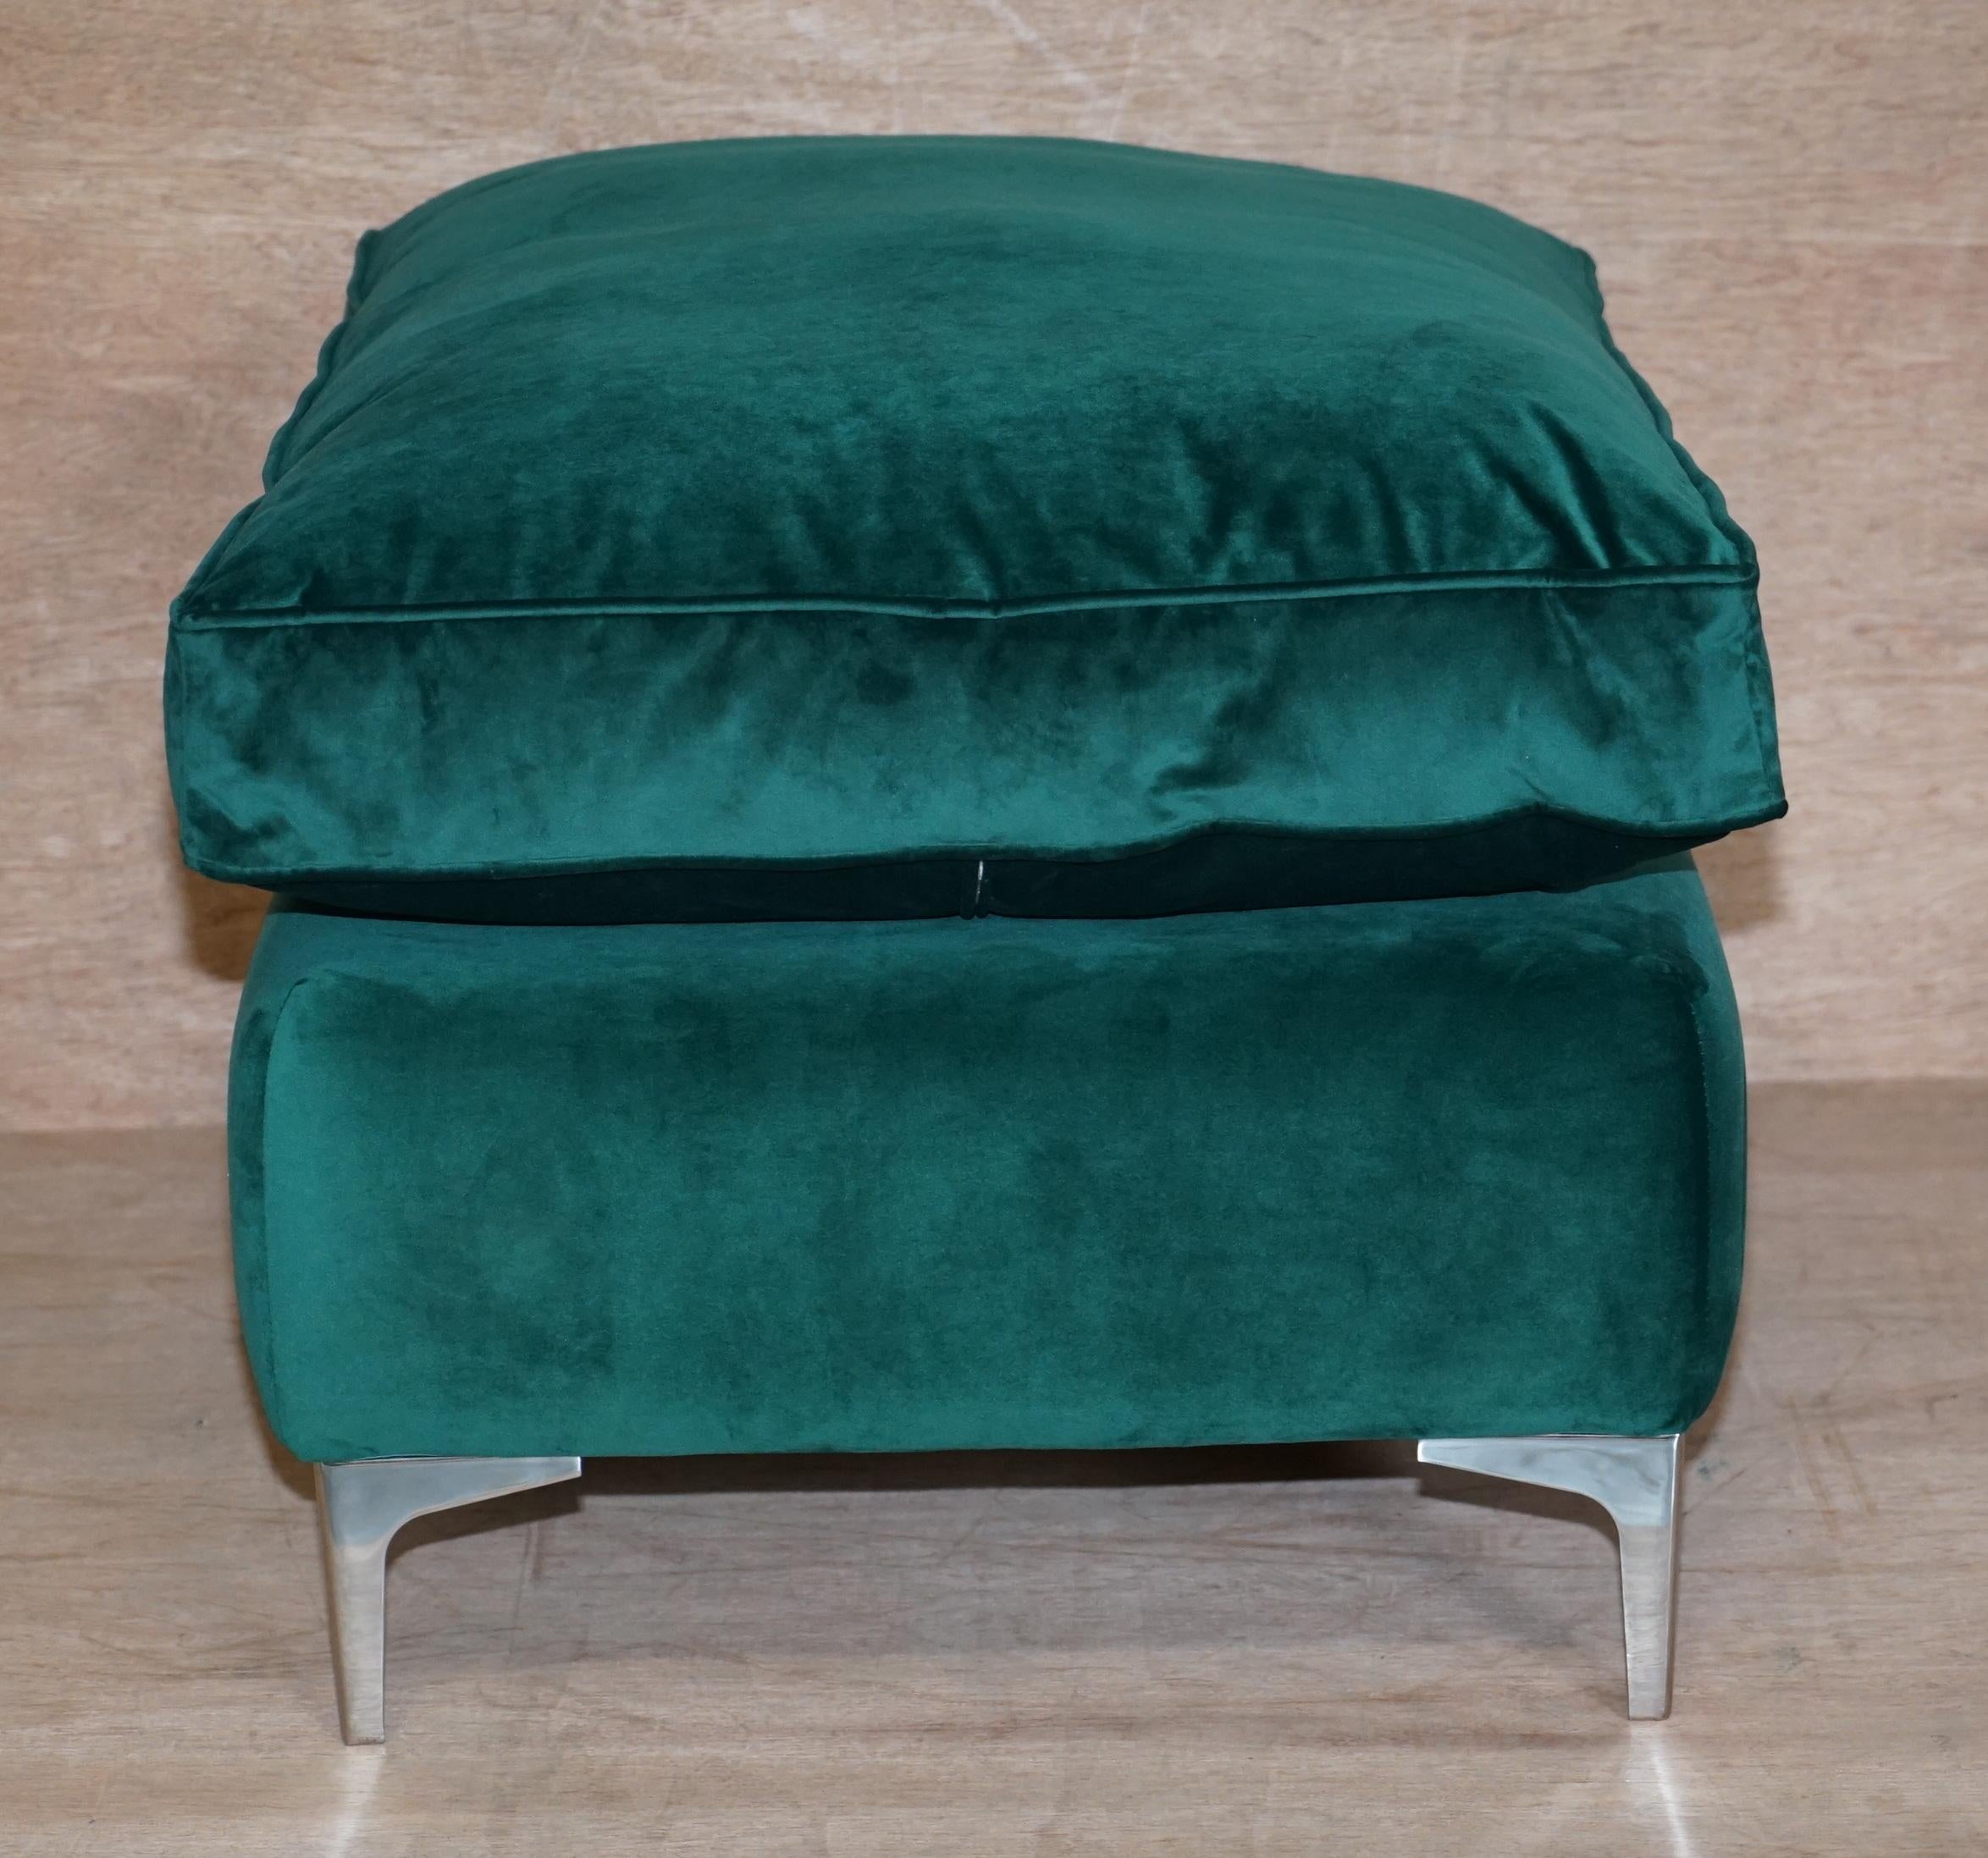 20th Century Stunning Ex Display Emerald Green Velvet Large Ottoman Footstool or Bench Seat For Sale